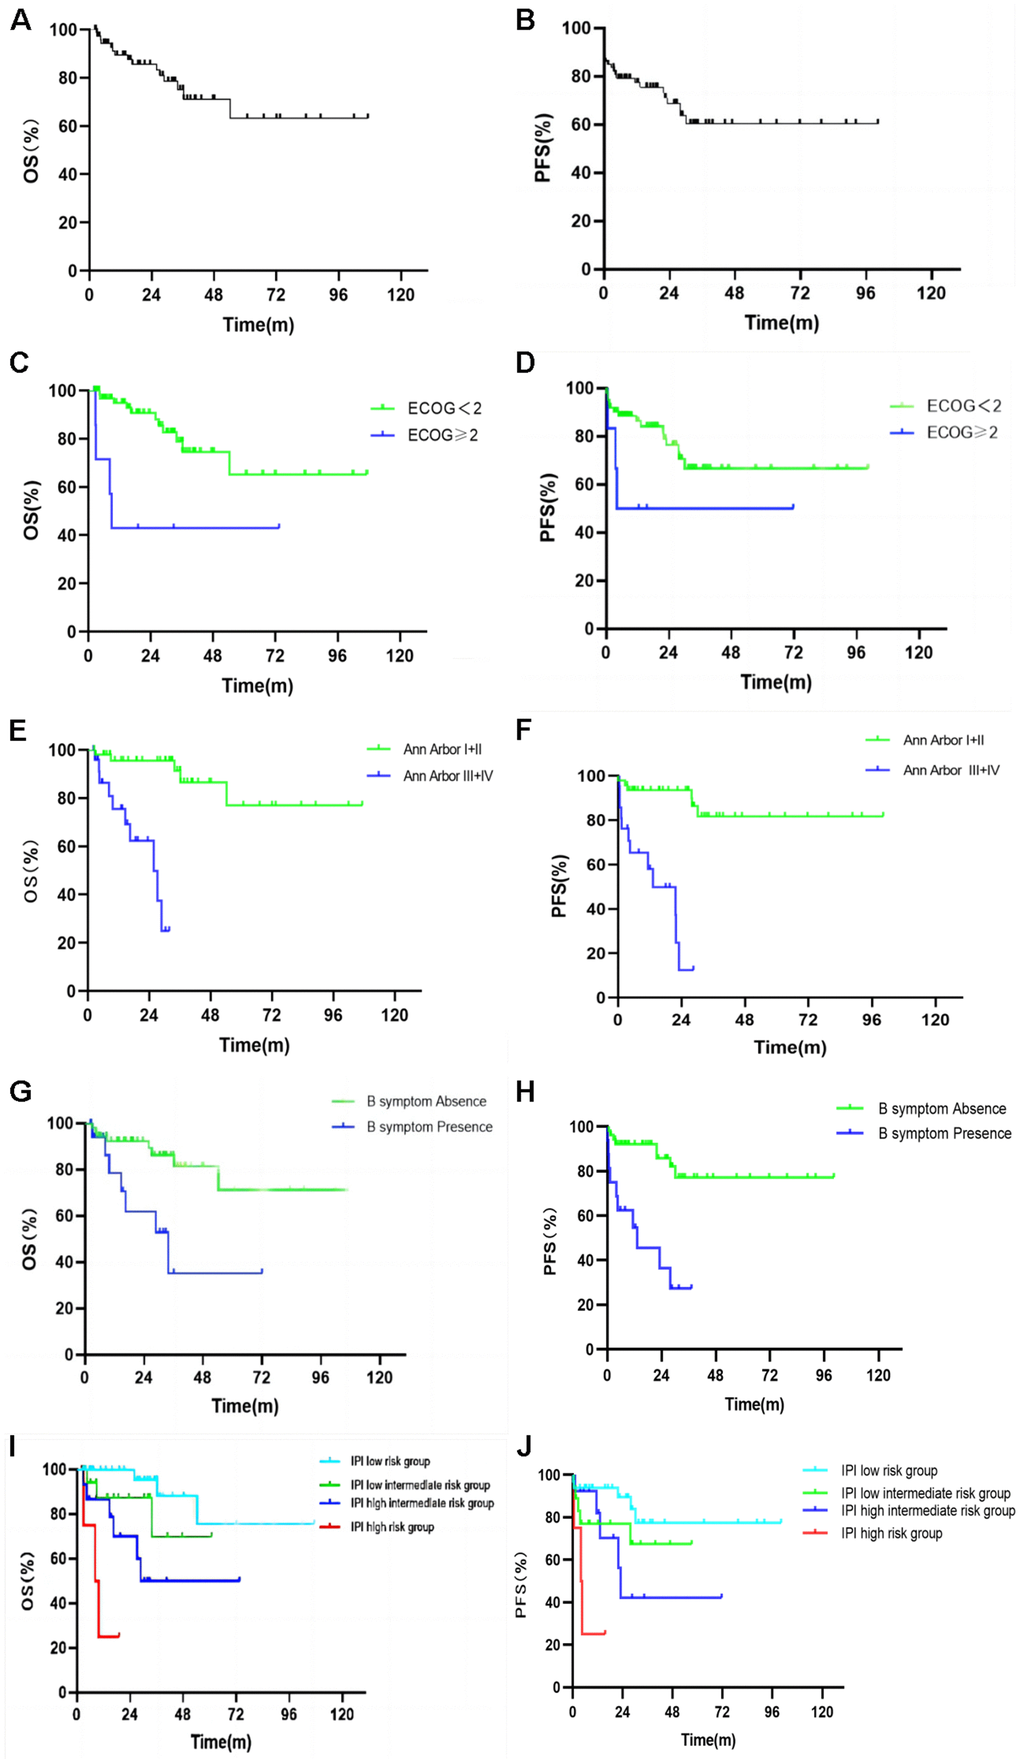 Kaplan Meier plots of the overall survival (A) and progression free survival (B) of all patients. Kaplan Meier plots of the overall survival and progression free survival by ECOG score (C, D), Ann Arbor stage (E, F), B symptoms (G, H), and IPI risk group stratification (I, J).